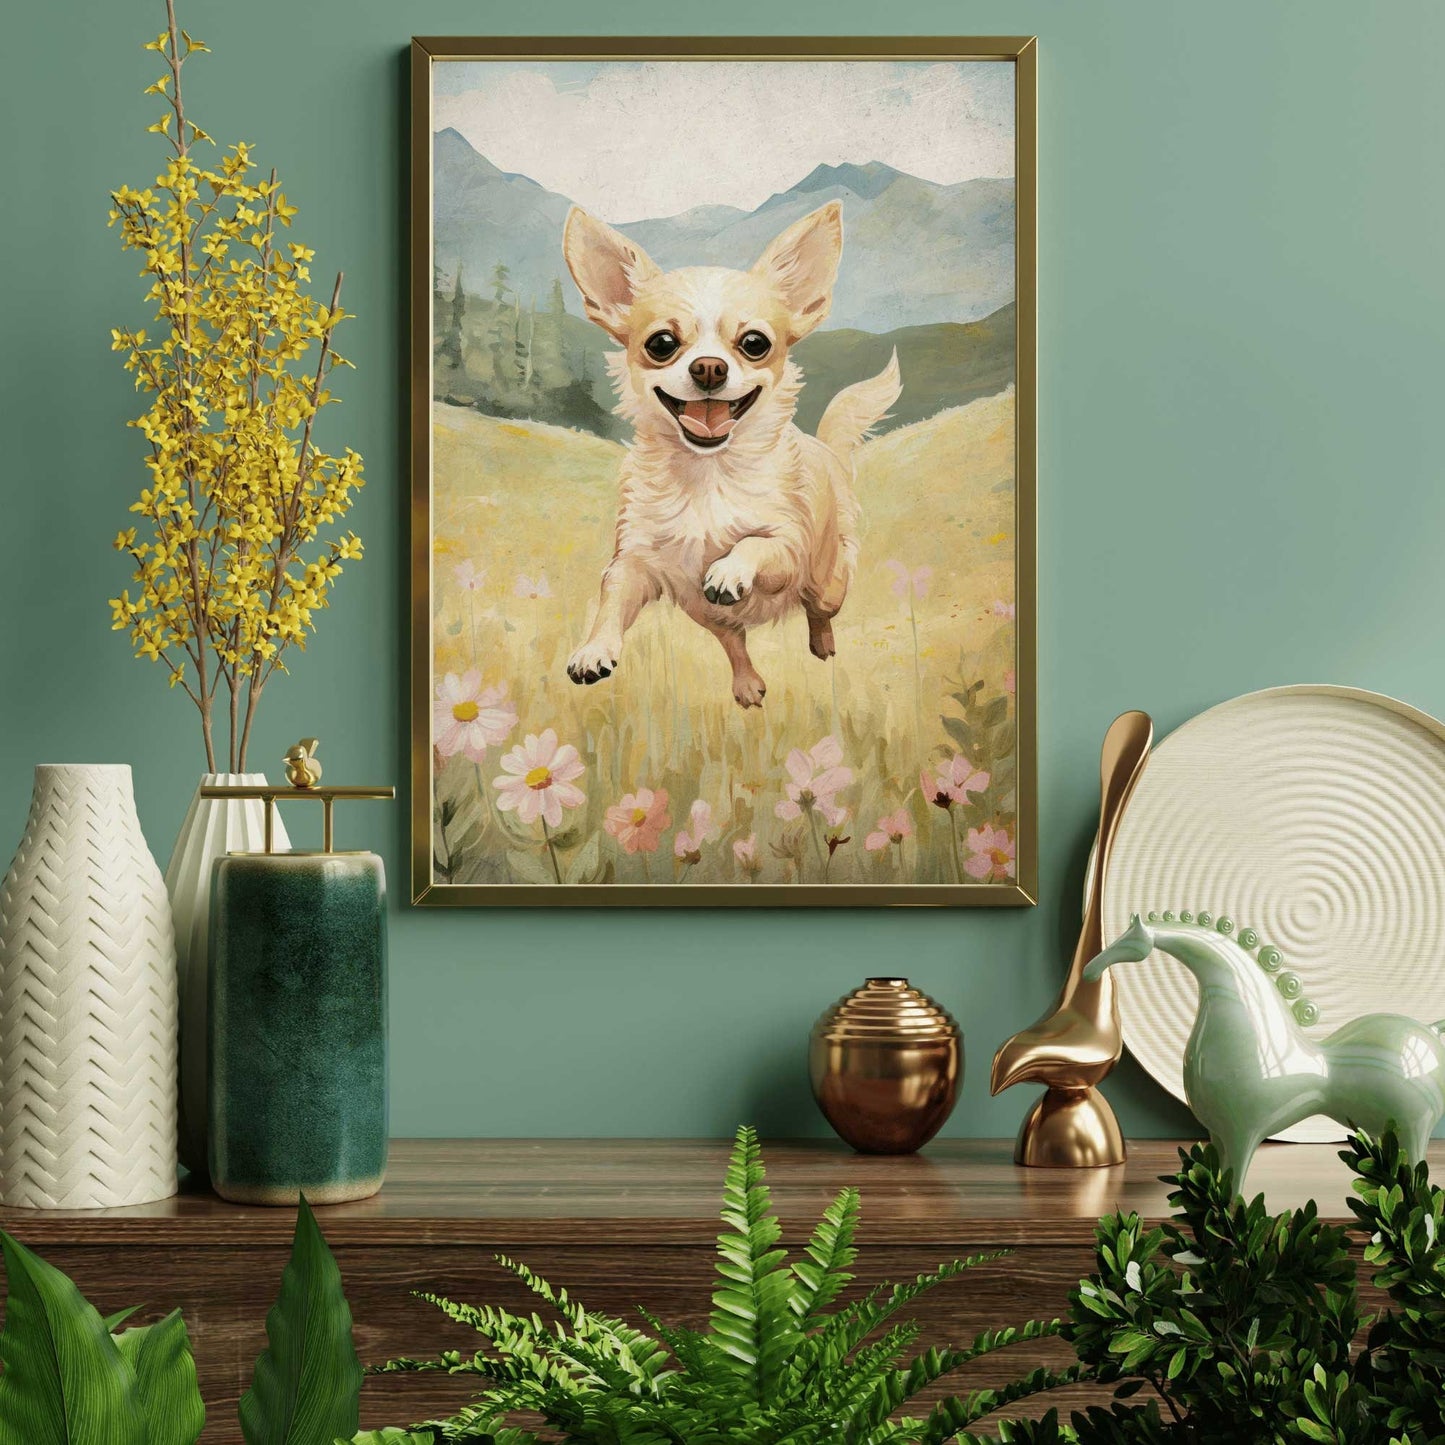 Chihuahua Print, Vintage Dog Decor, Running Dog Portrait, Dogs and Flowers, DIGITAL Printable Art for Chihuahua Lovers & Owners